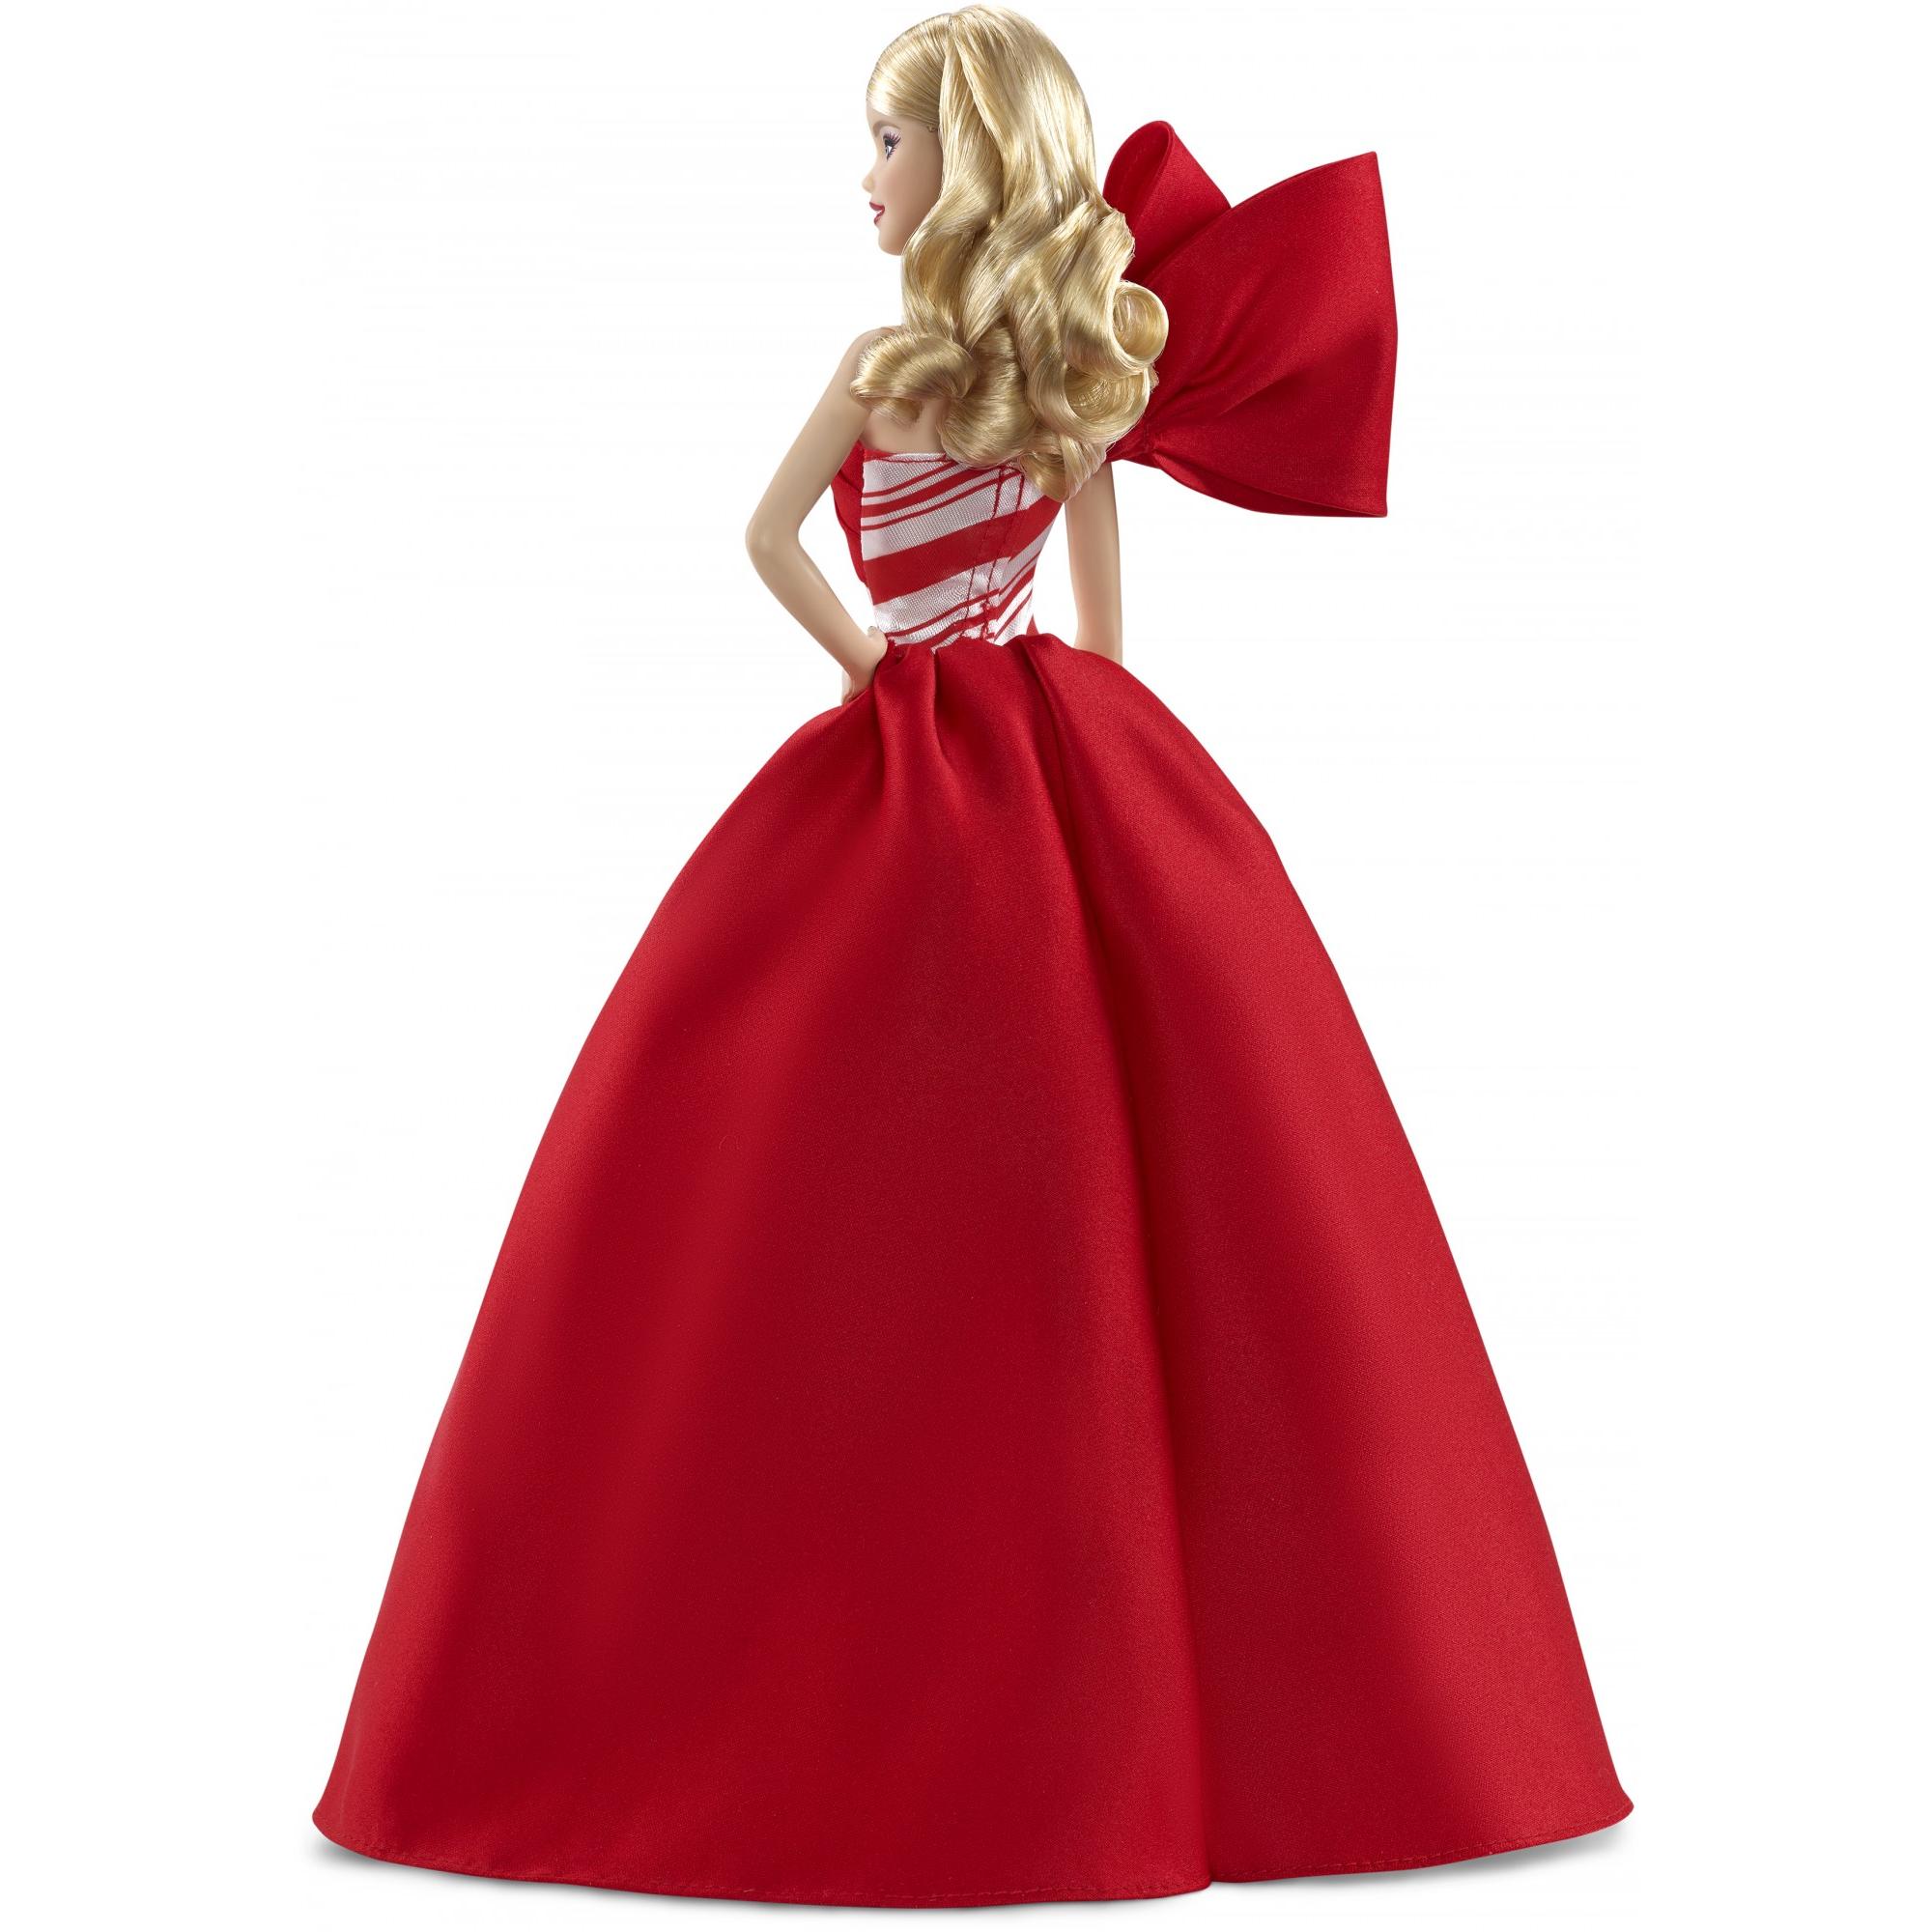 Barbie 2019 Holiday Doll, Blonde Curls with Red & White Gown - image 8 of 10